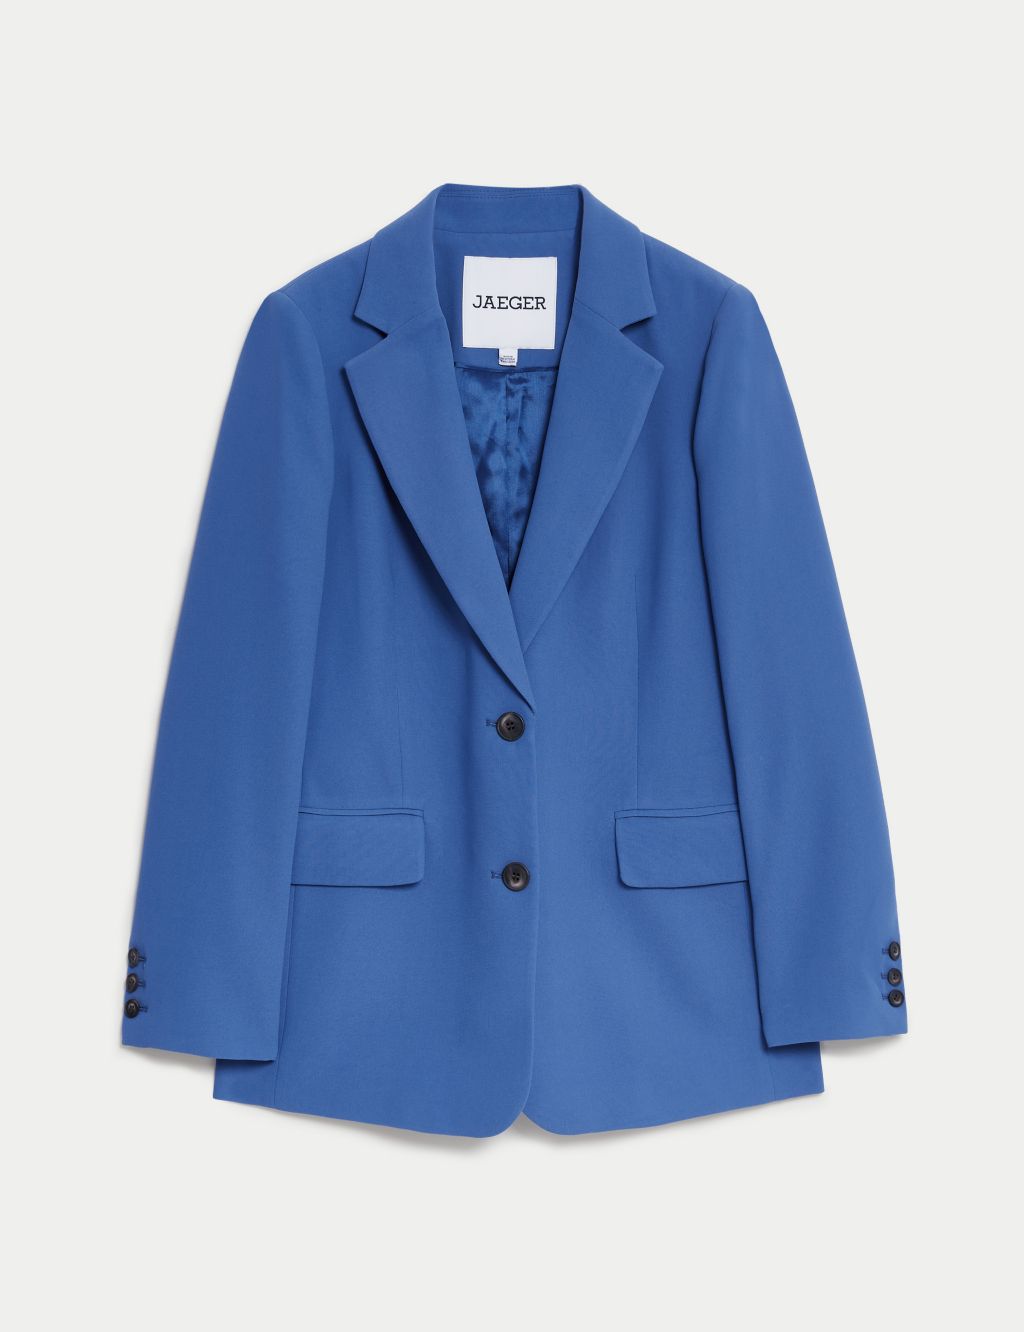 Crepe Tailored Single Breasted Blazer image 2